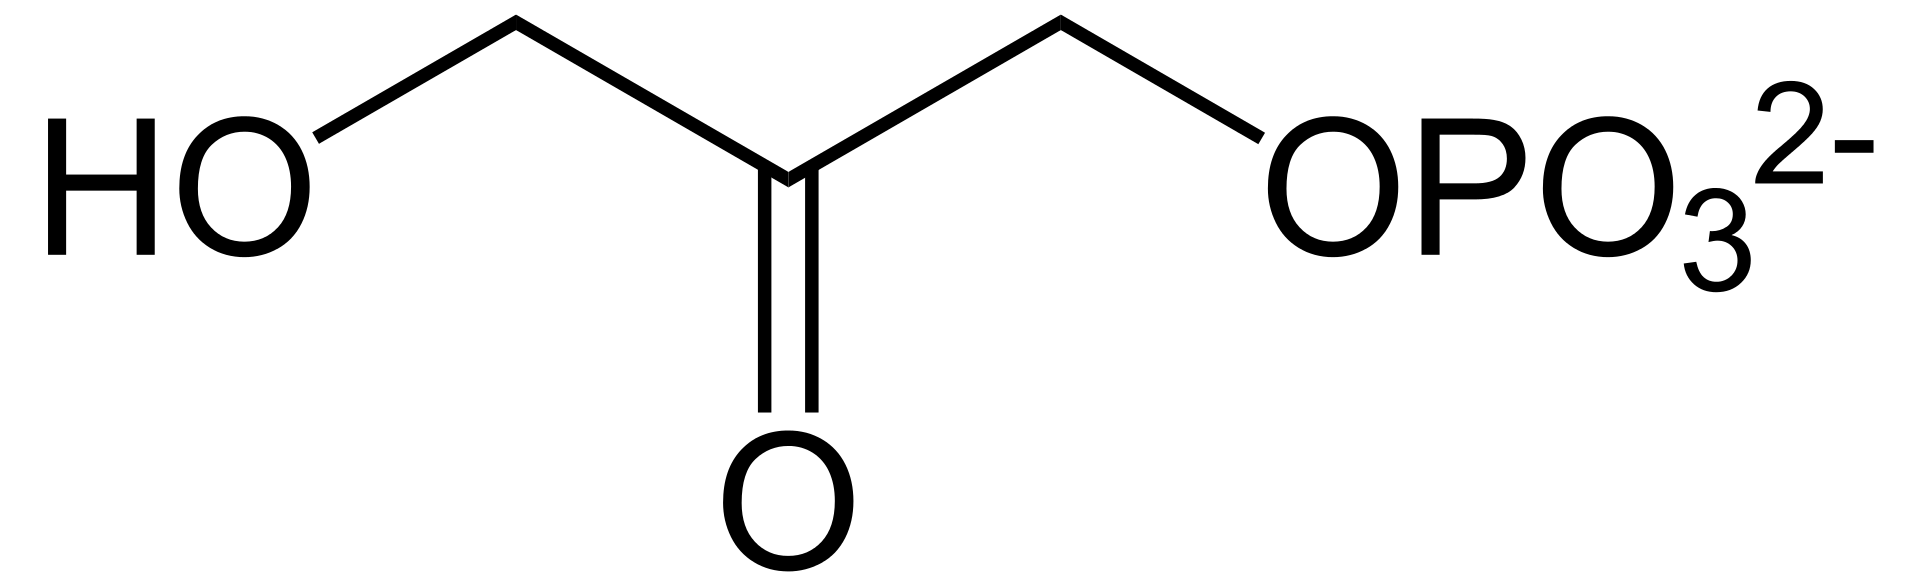 Molecular structure of dihydroxyacetone phosphate